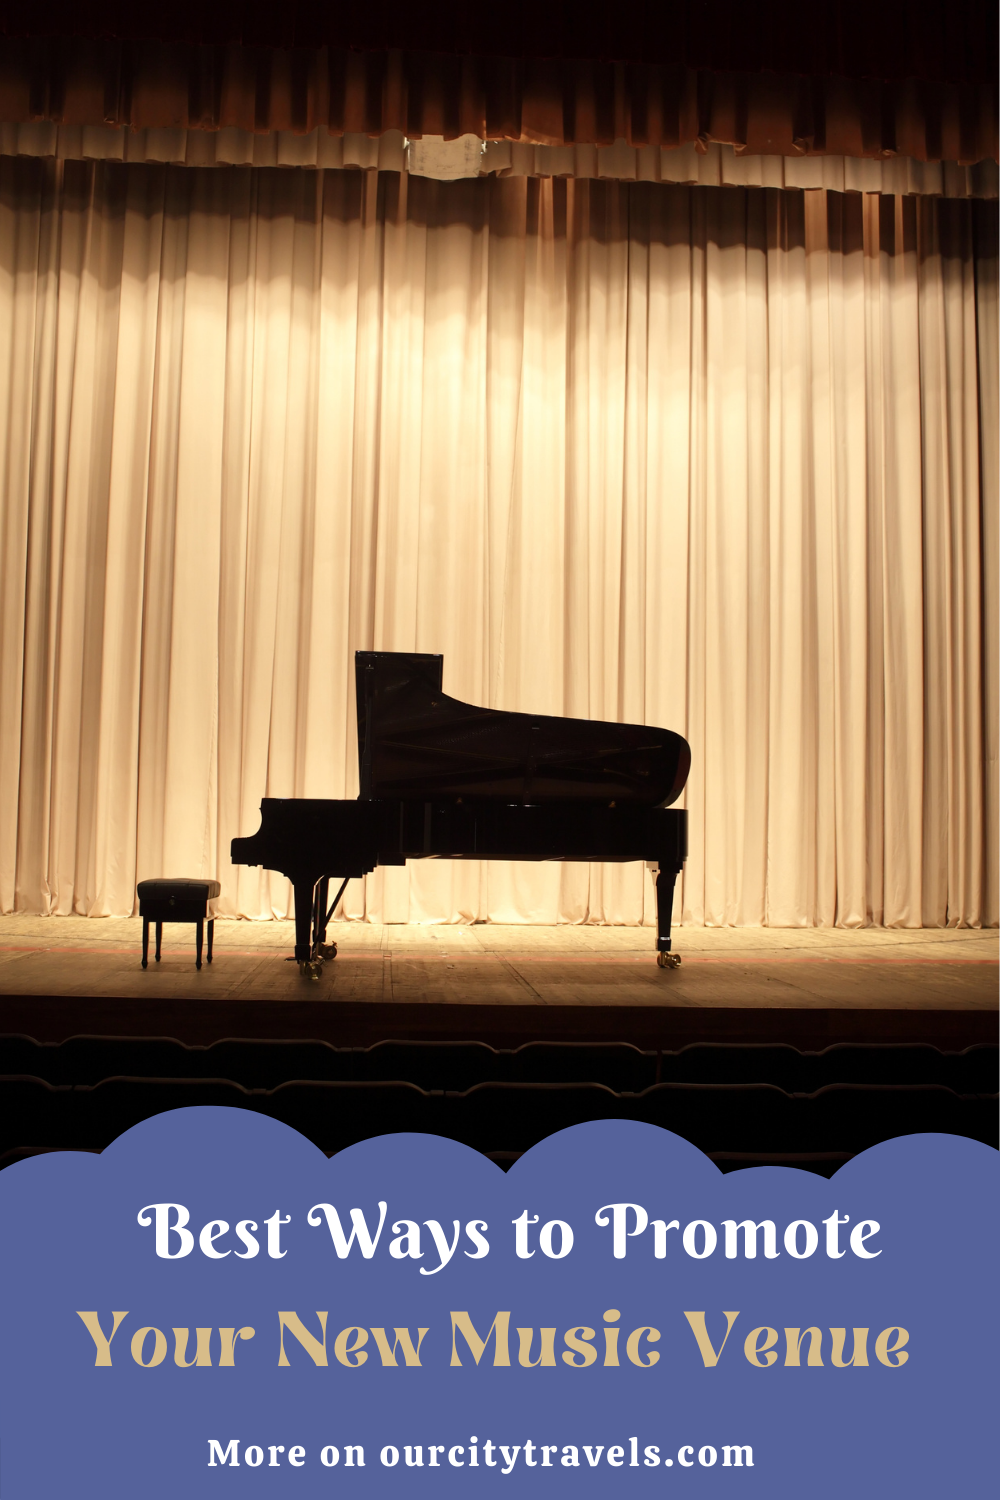 5 Best Ways to Promote Your New Music Venue, piano stage